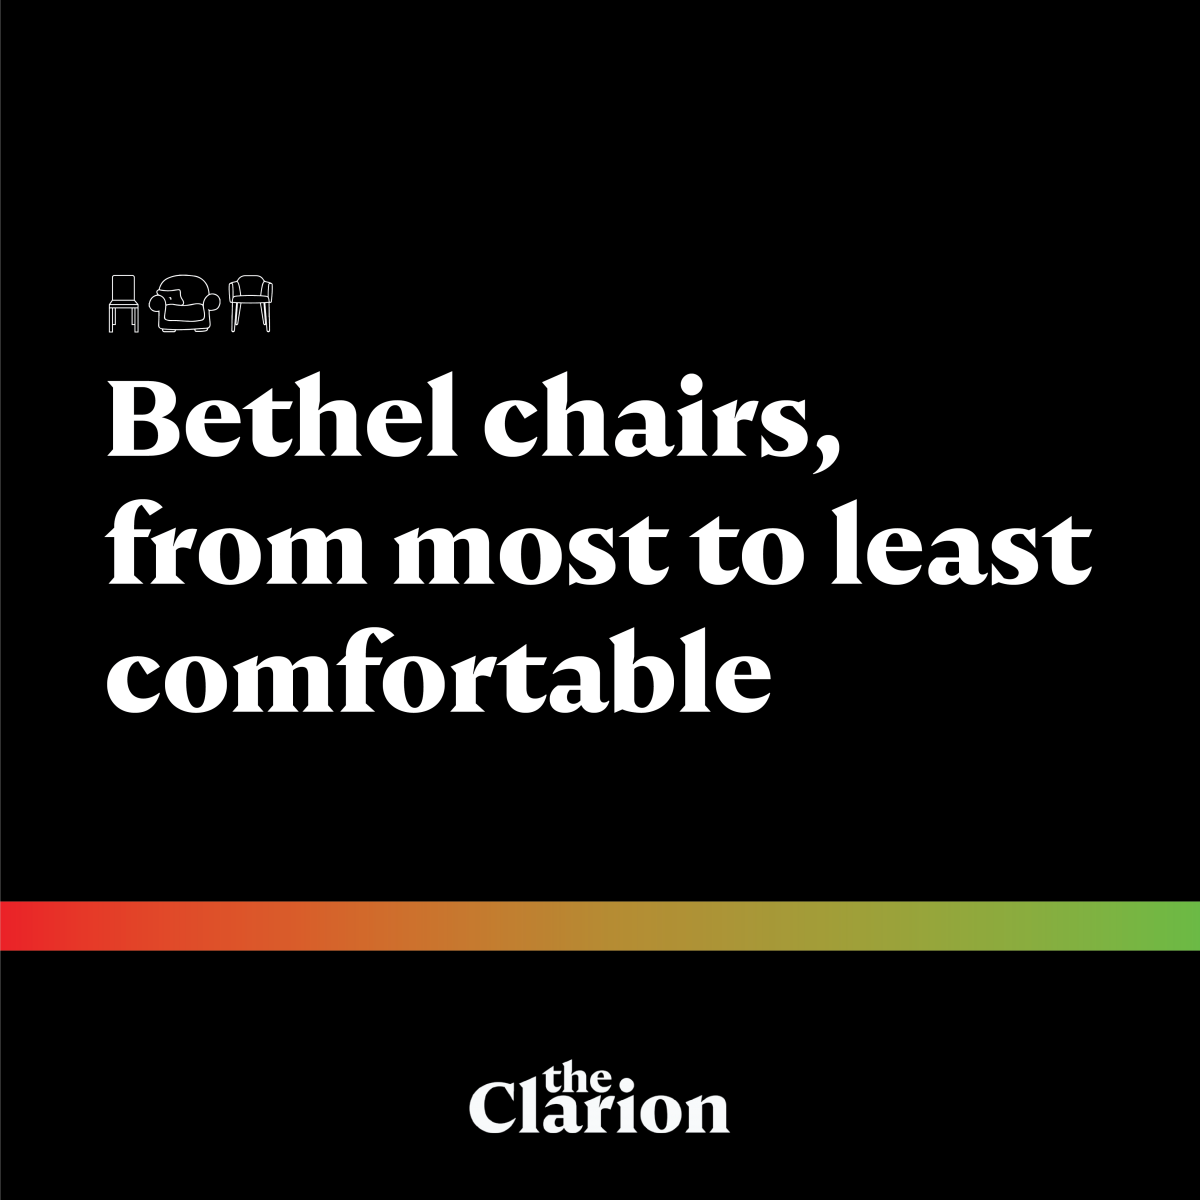 Hotlist: Bethel chairs, from most to least comfortable